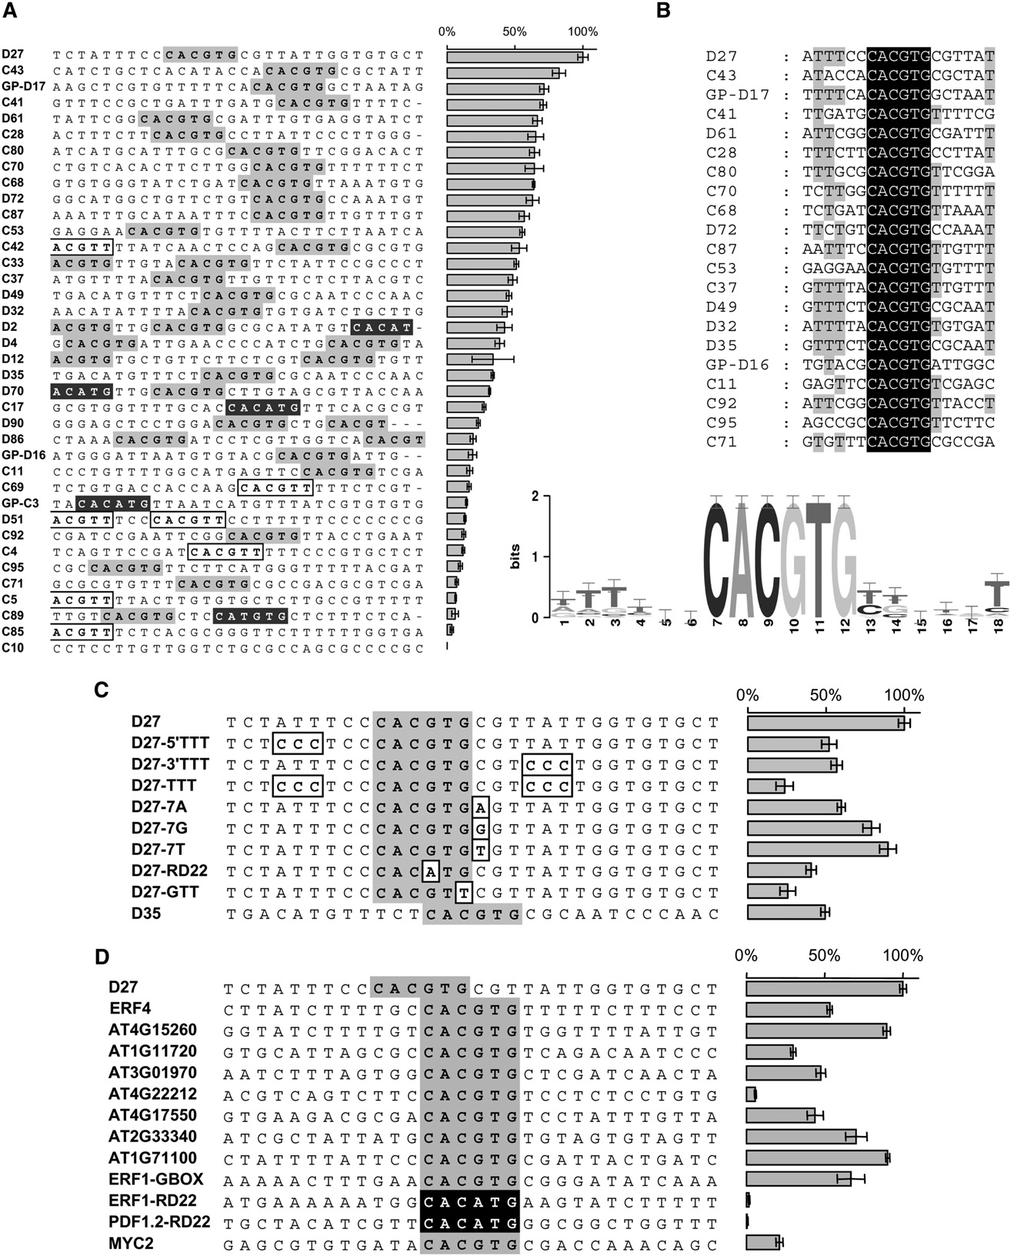 2234 The Plant Cell Figure 7. MYC2 Preferentially Binds to an Extended G-Box Motif. (A) Sequences and MYC2 binding activities of 38 30-mers from affinity purification selection rounds 3 and 4.